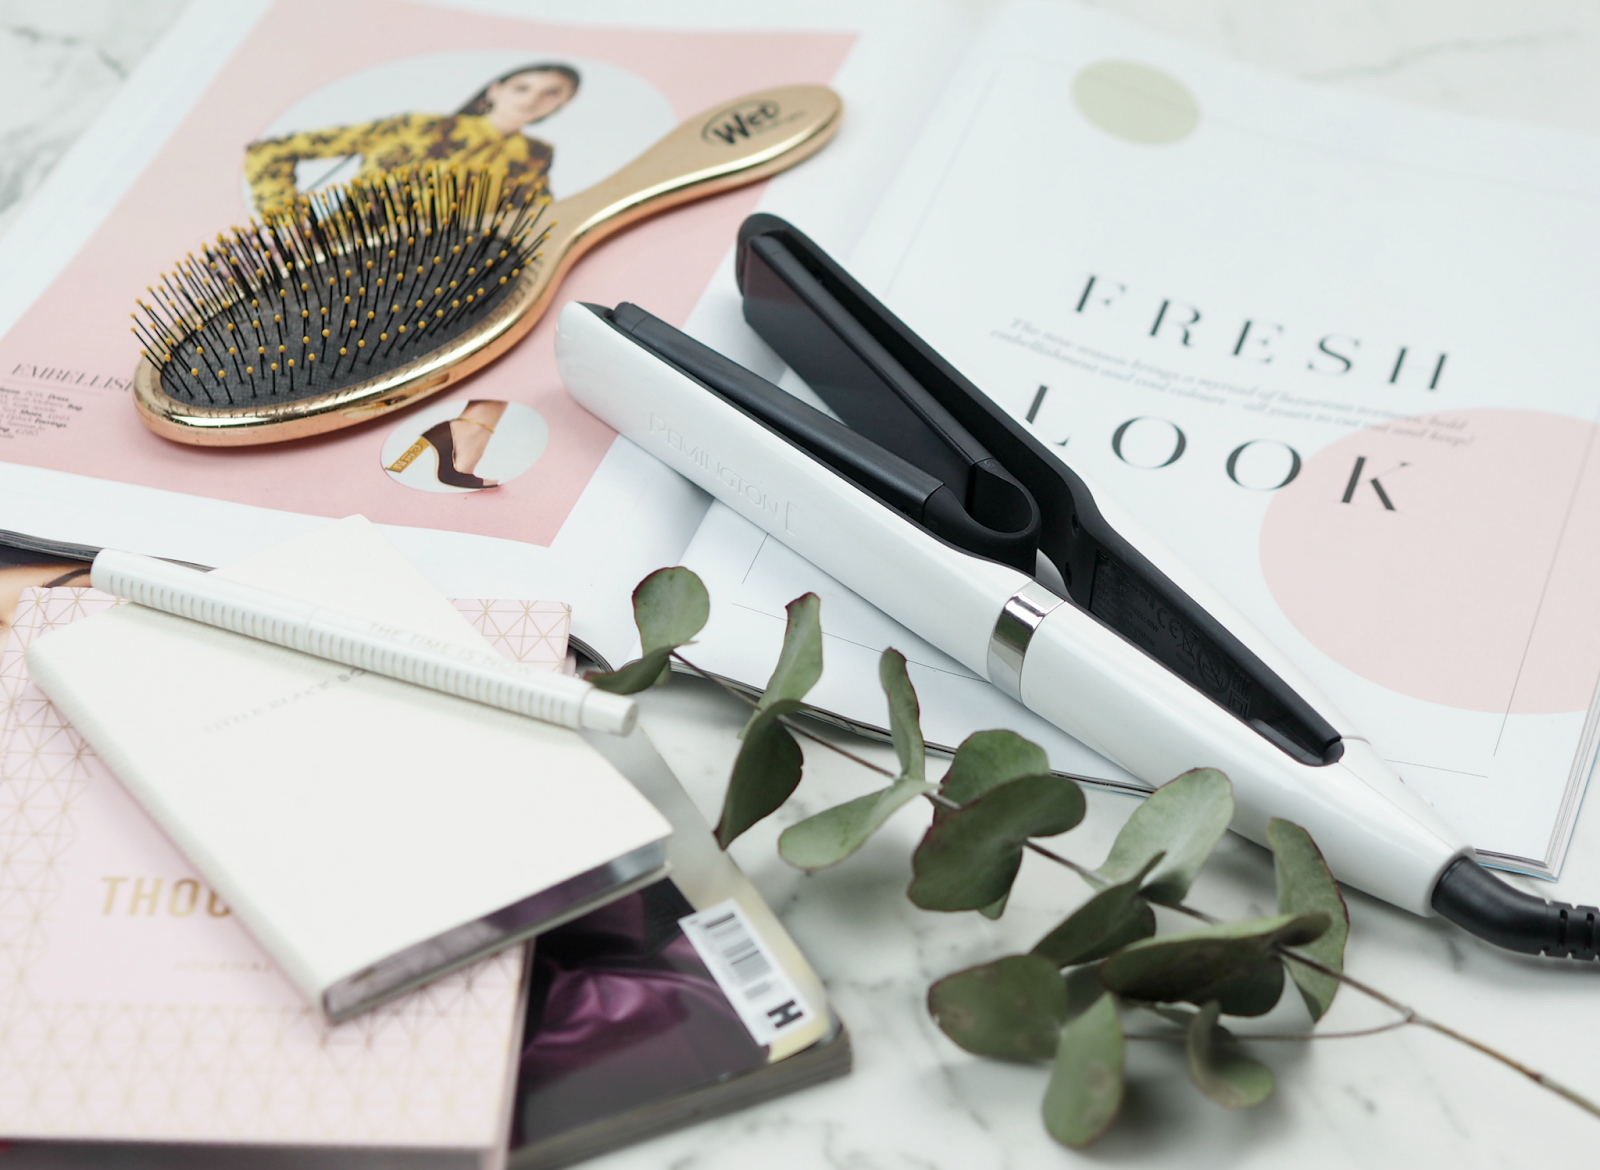 The World's First Suspended Plate Straightener: Are Remington's 'Air Plates' Really A Superior Way To Style"